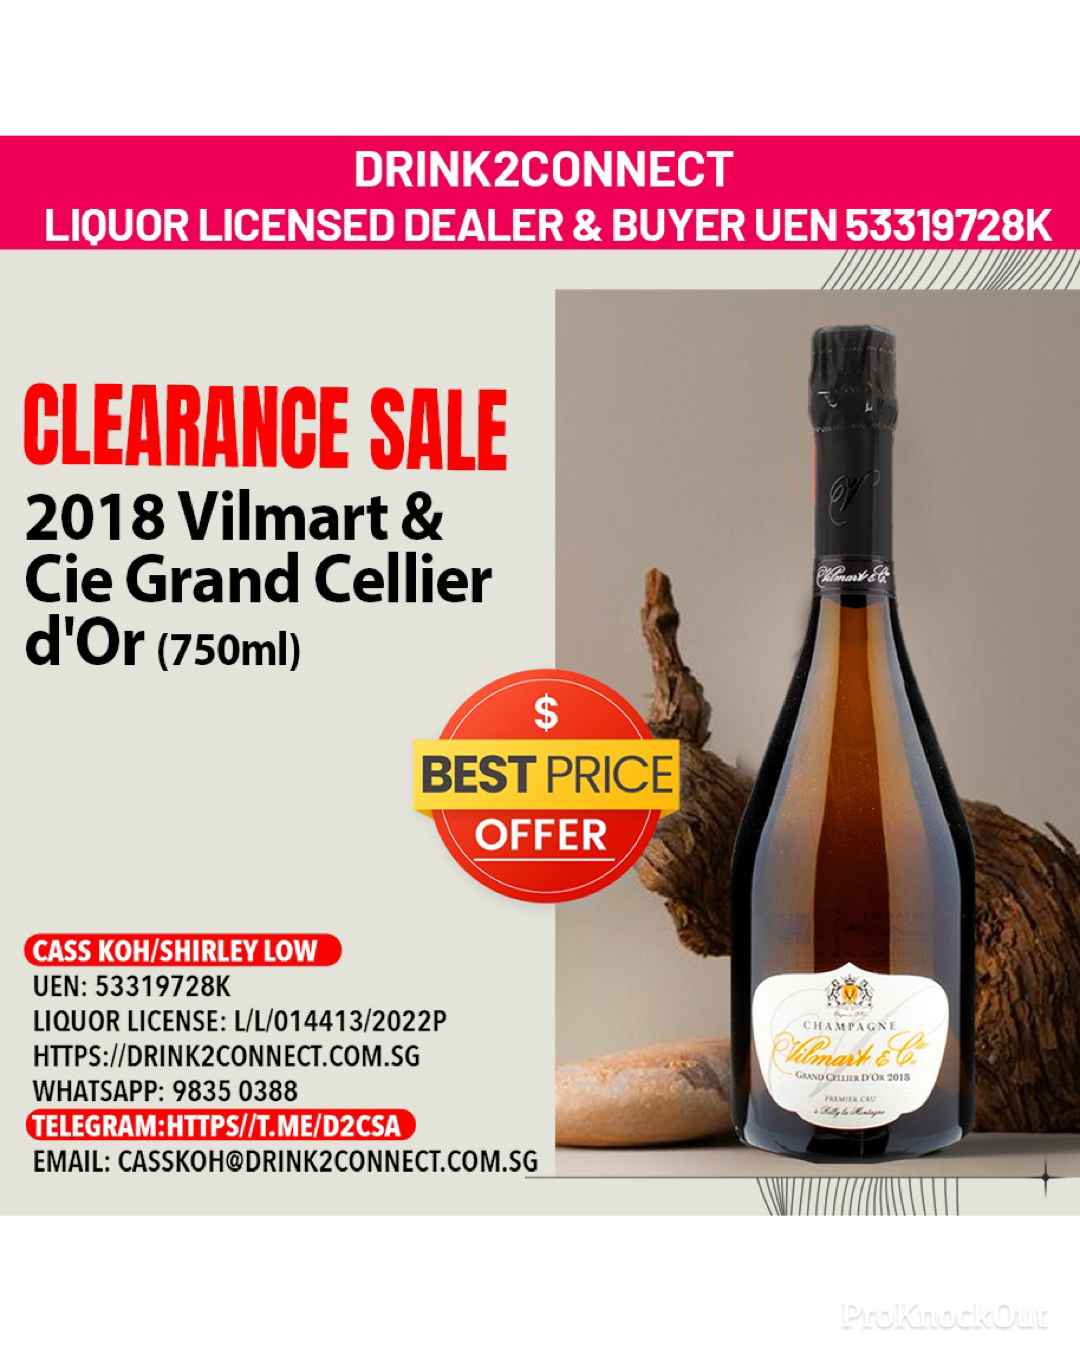 750ml Vilmart & Cie Grand Cellier D'Or Champagne 2018/Vilmart Grand Cellier D'Or Champagne/Buy Champagne Online